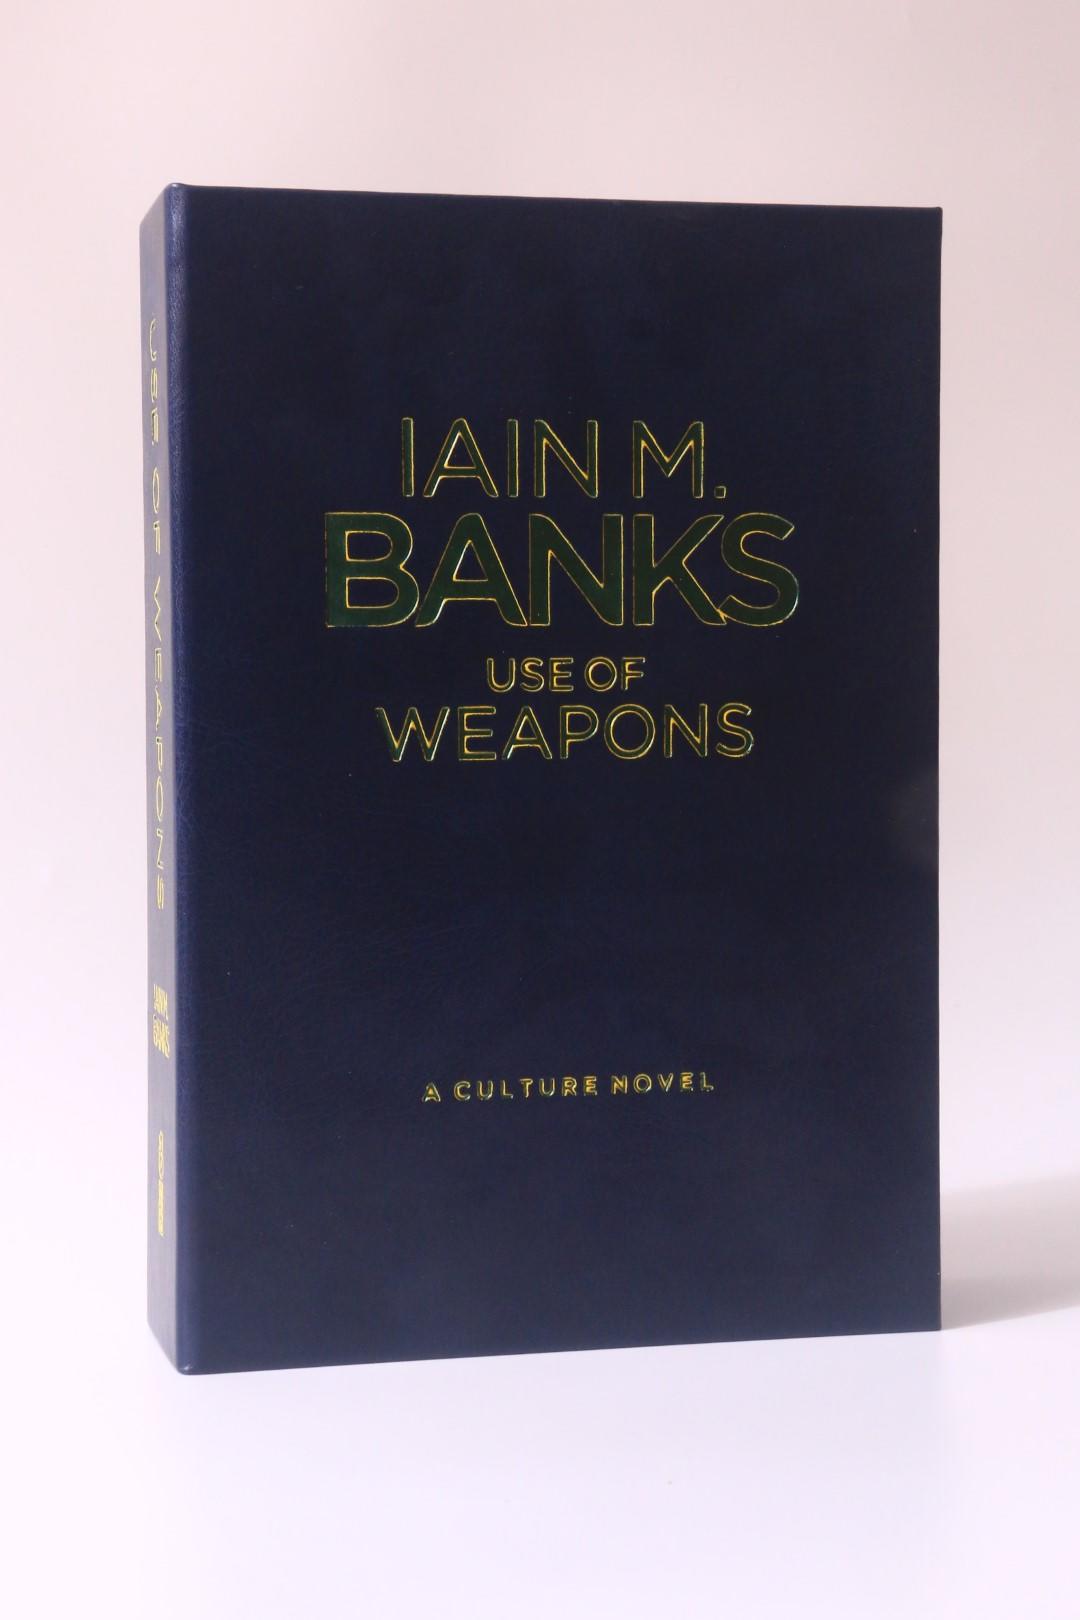 Iain M. Banks - Use of Weapons - Subterranean Press, 2020, Limited Edition.